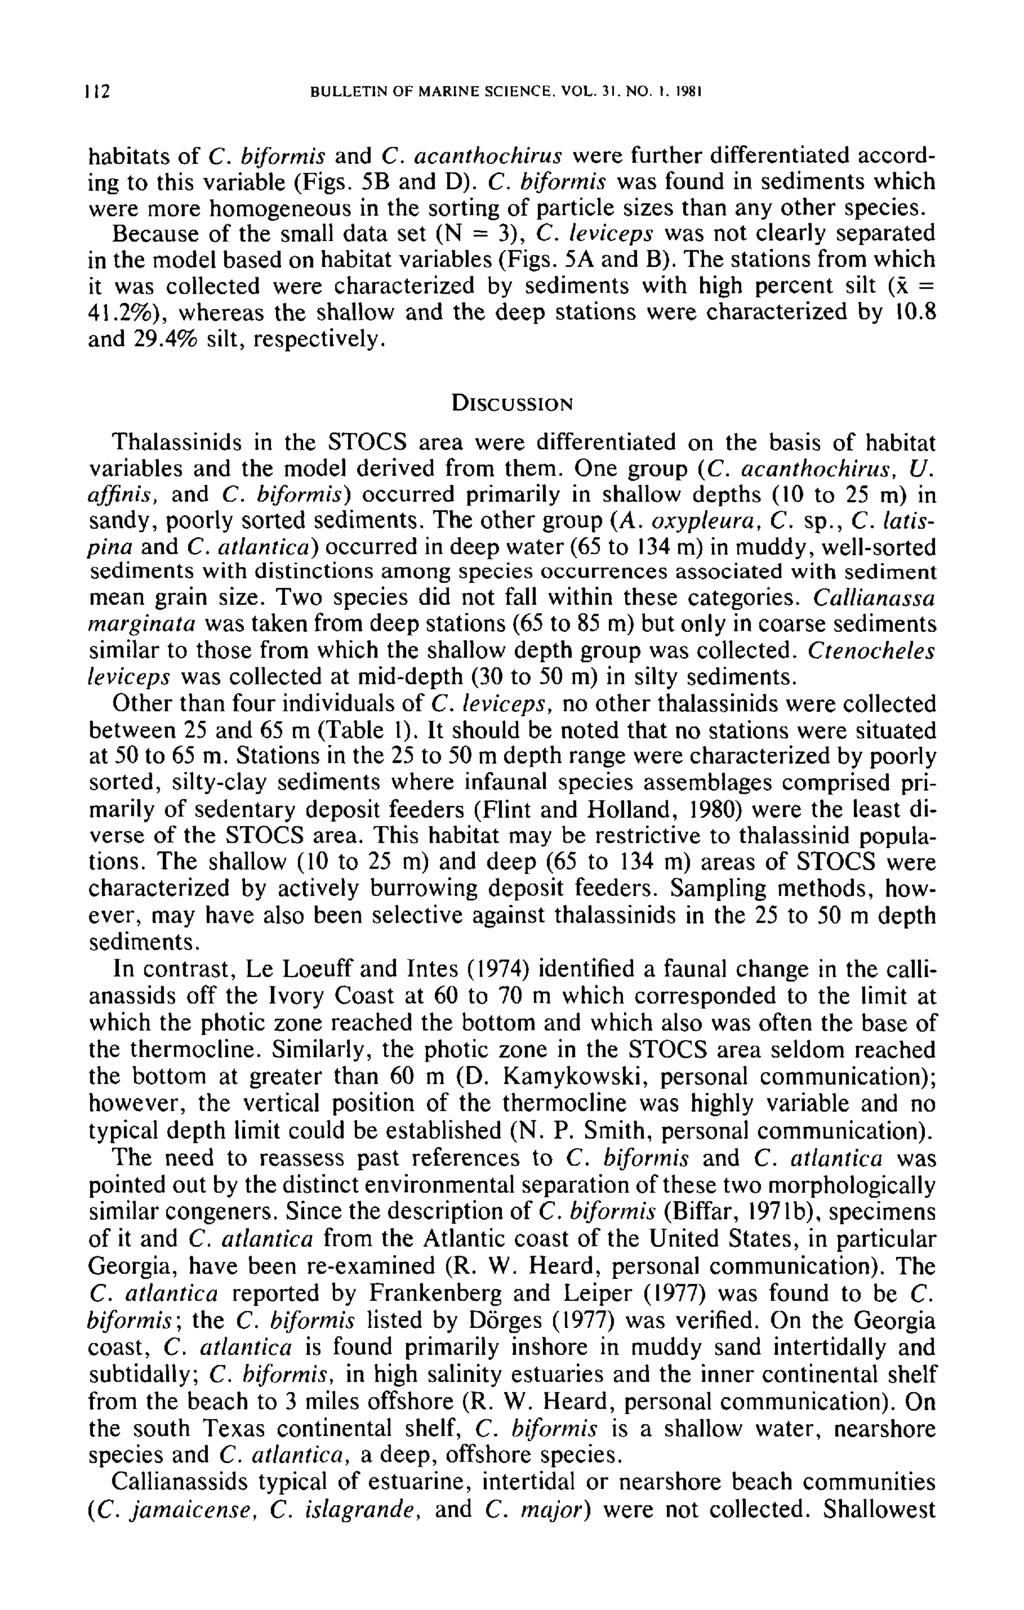 112 BULLETIN OF MARINE SCIENCE. VOL. 31. NO.1. 1981 habitats of C. biformis and C. acanthochirus were further differentiated according to this variable (Figs. 5B and D). C. biformis was found in sediments which were more homogeneous in the sorting of particle sizes than any other species.